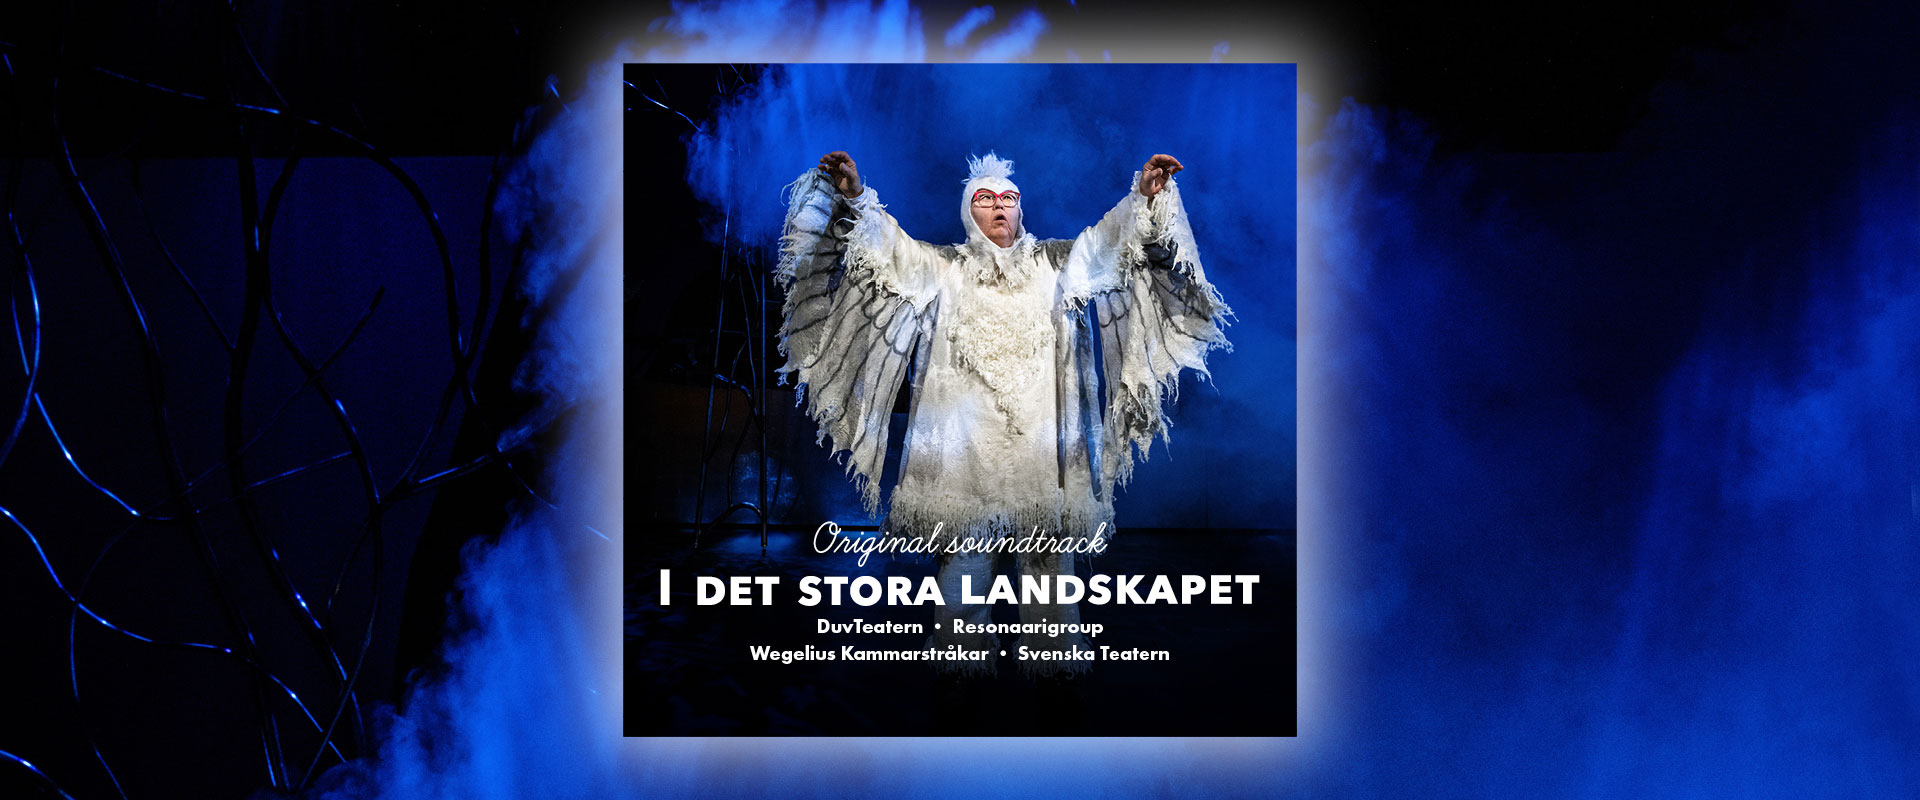 The cover of the album Original soundtrack “I det stora landskapet”, made by DuvTeatern, Resonaarigroup, Wegelius Kammarstråkar and Svenska Teatern. The background is a mix of blue and black, the blue color is a reflection against stage smoke. In front DuvTeatern actress Irina von Martens with her arms stretched to the sides like her role as an owl.